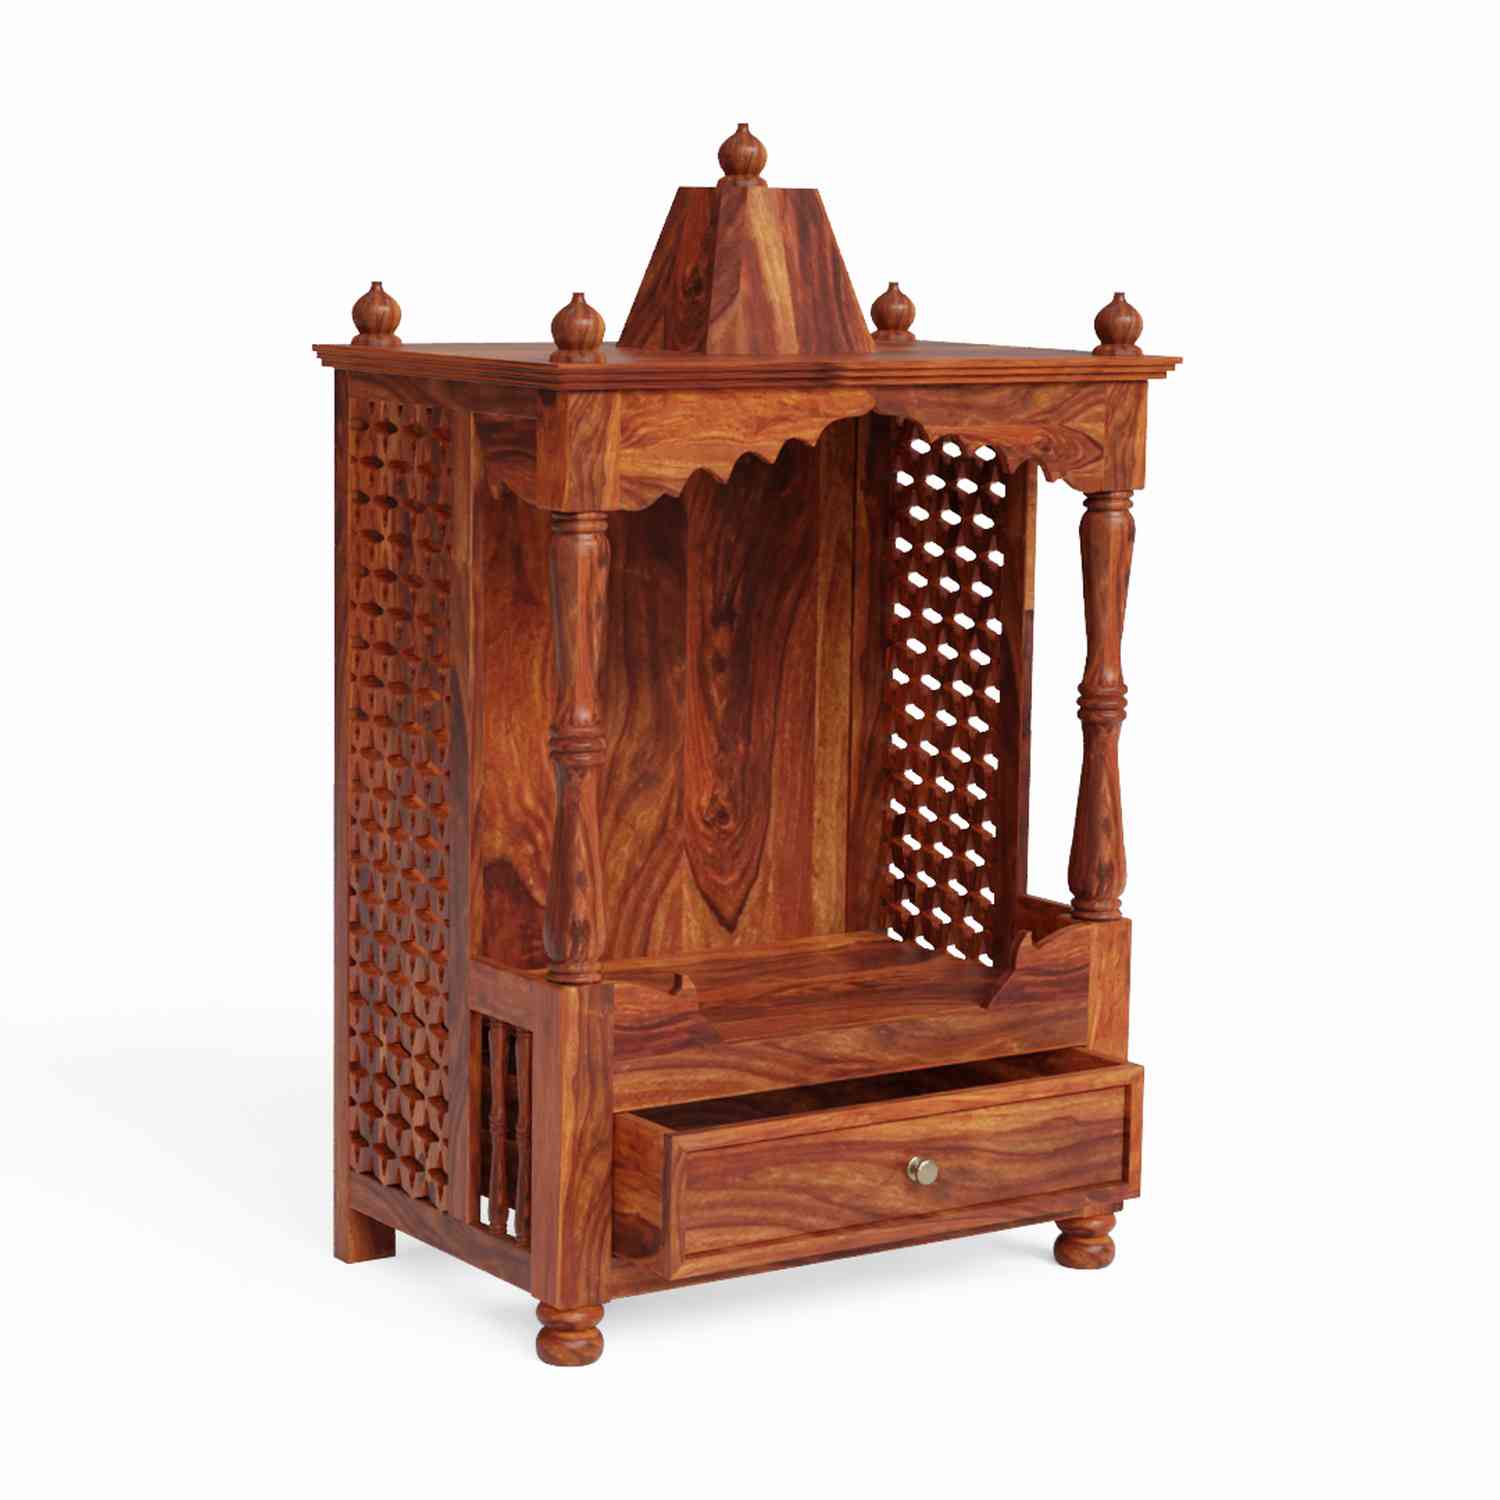 Aradhna Solid Sheesham Wood Temple for Home (Natural Finish)